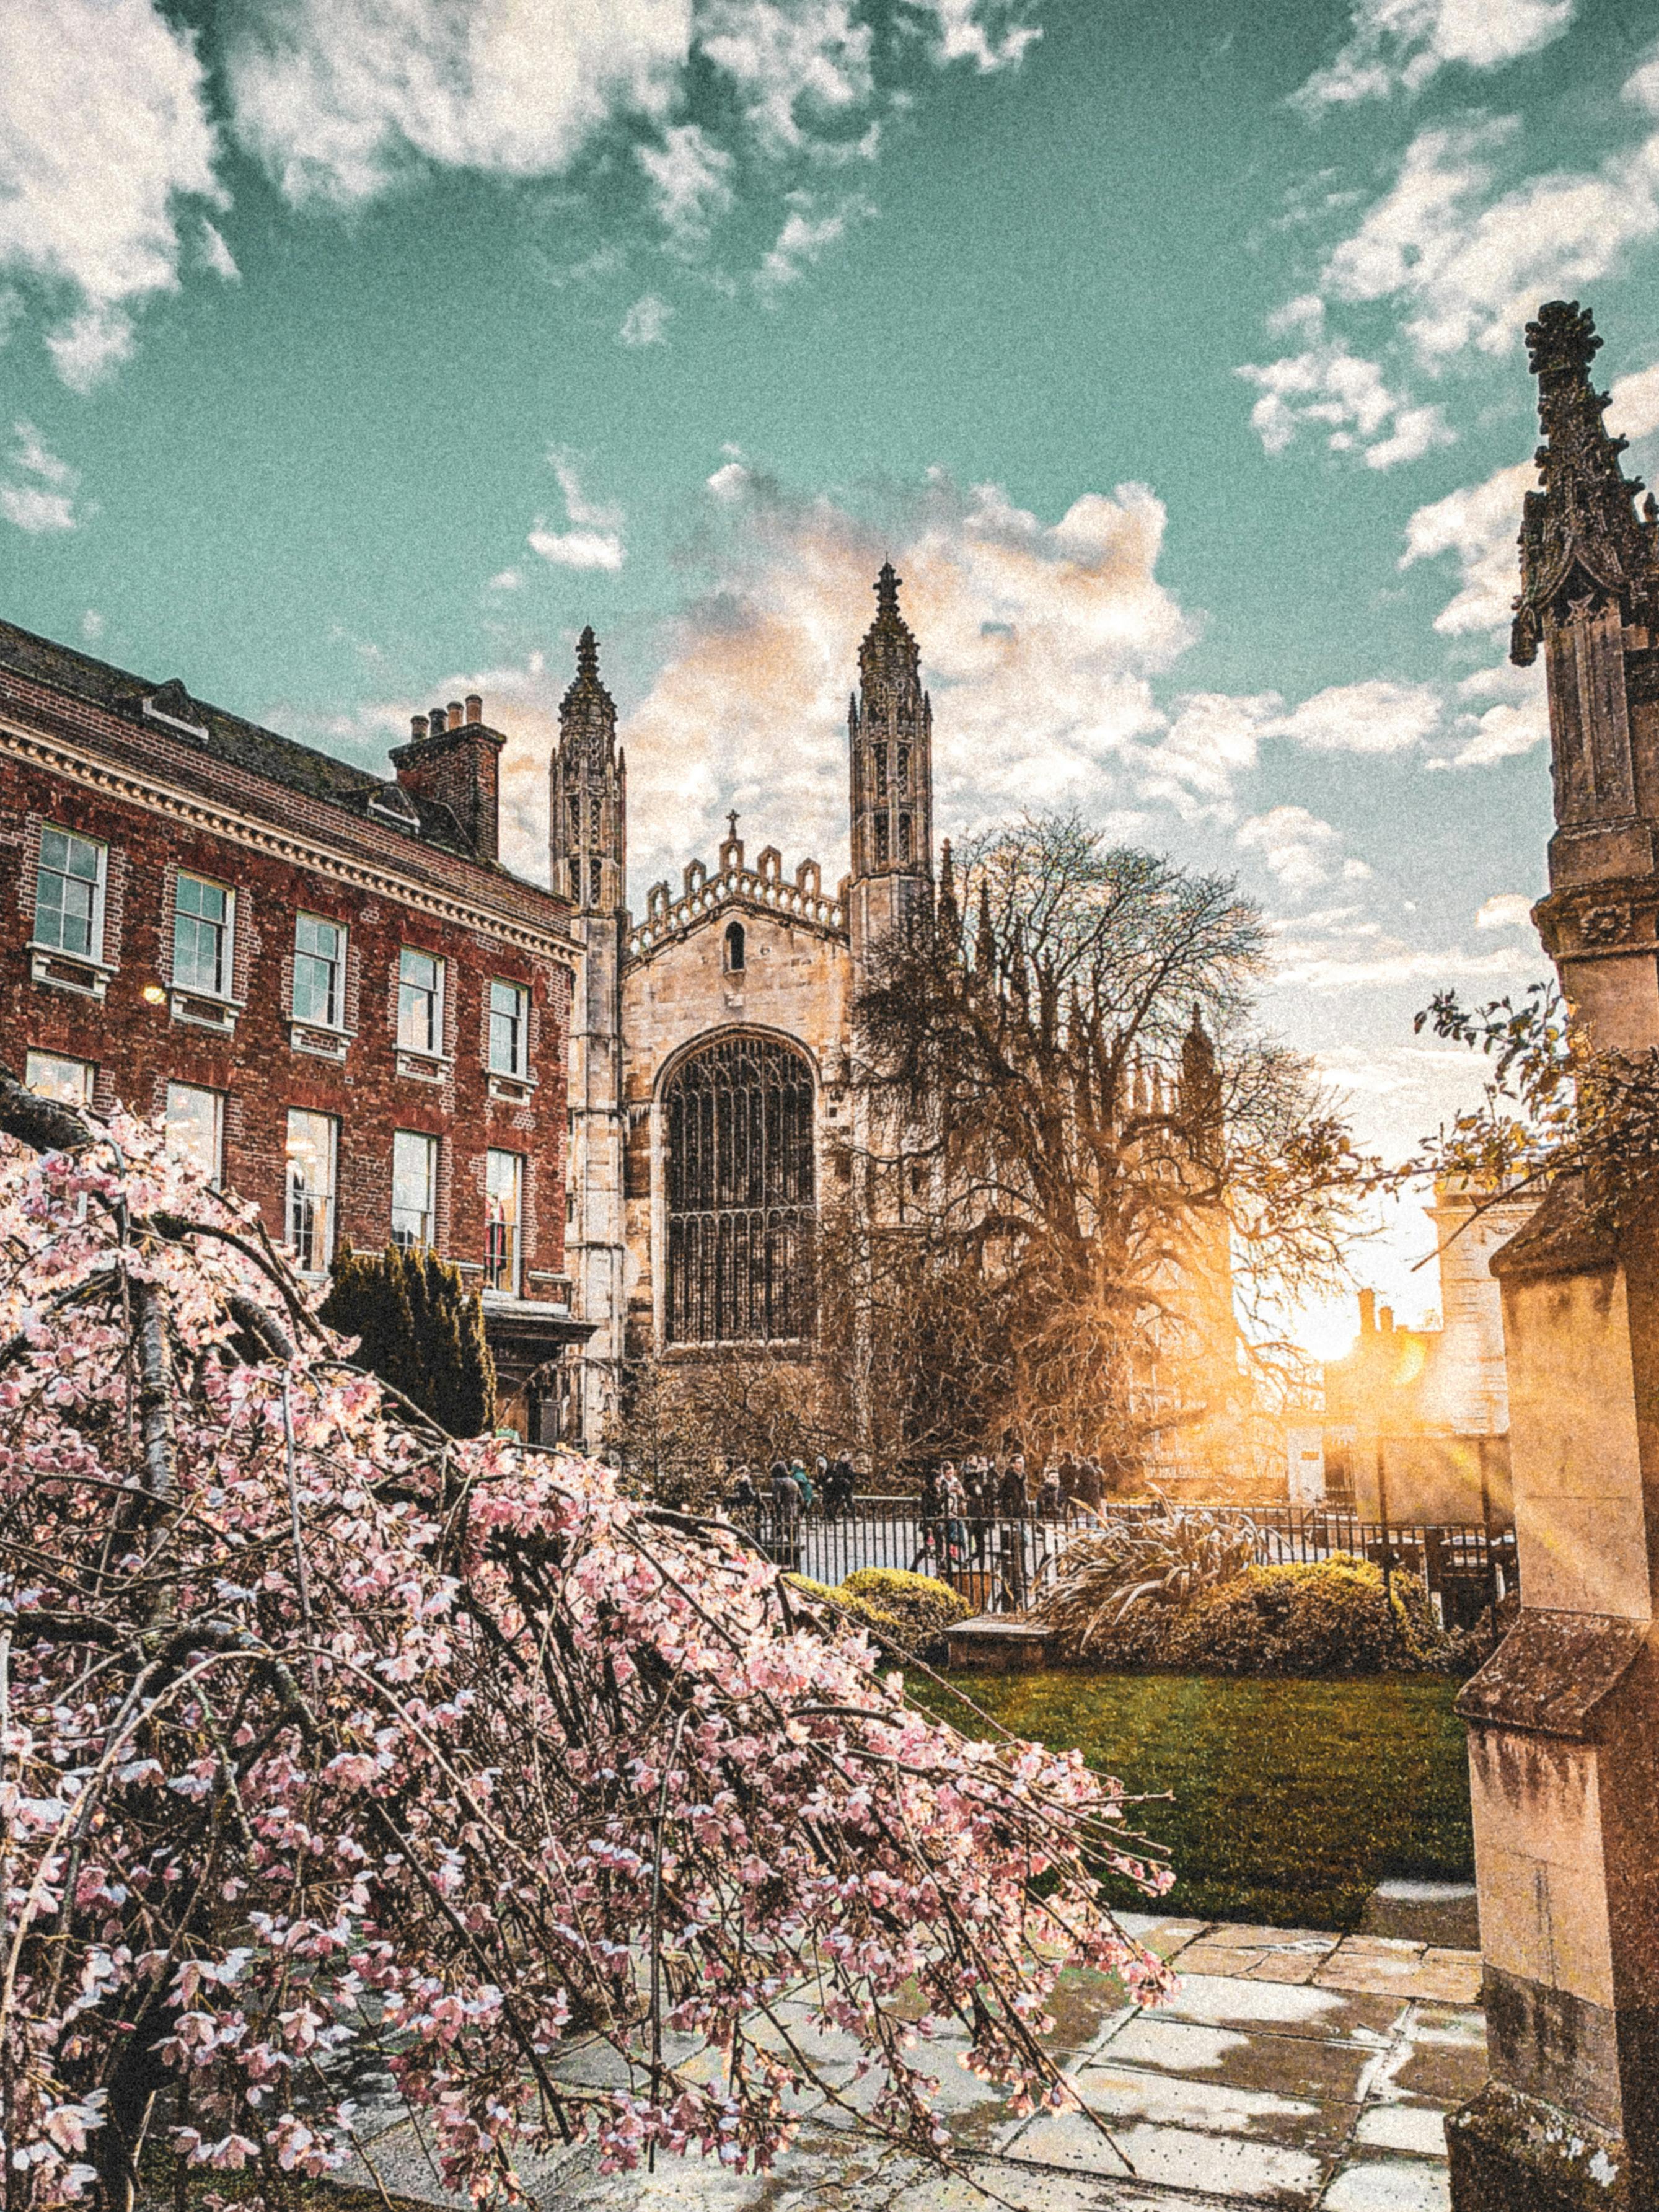 Discover Cambridge with a self-guided winter audio tour collection